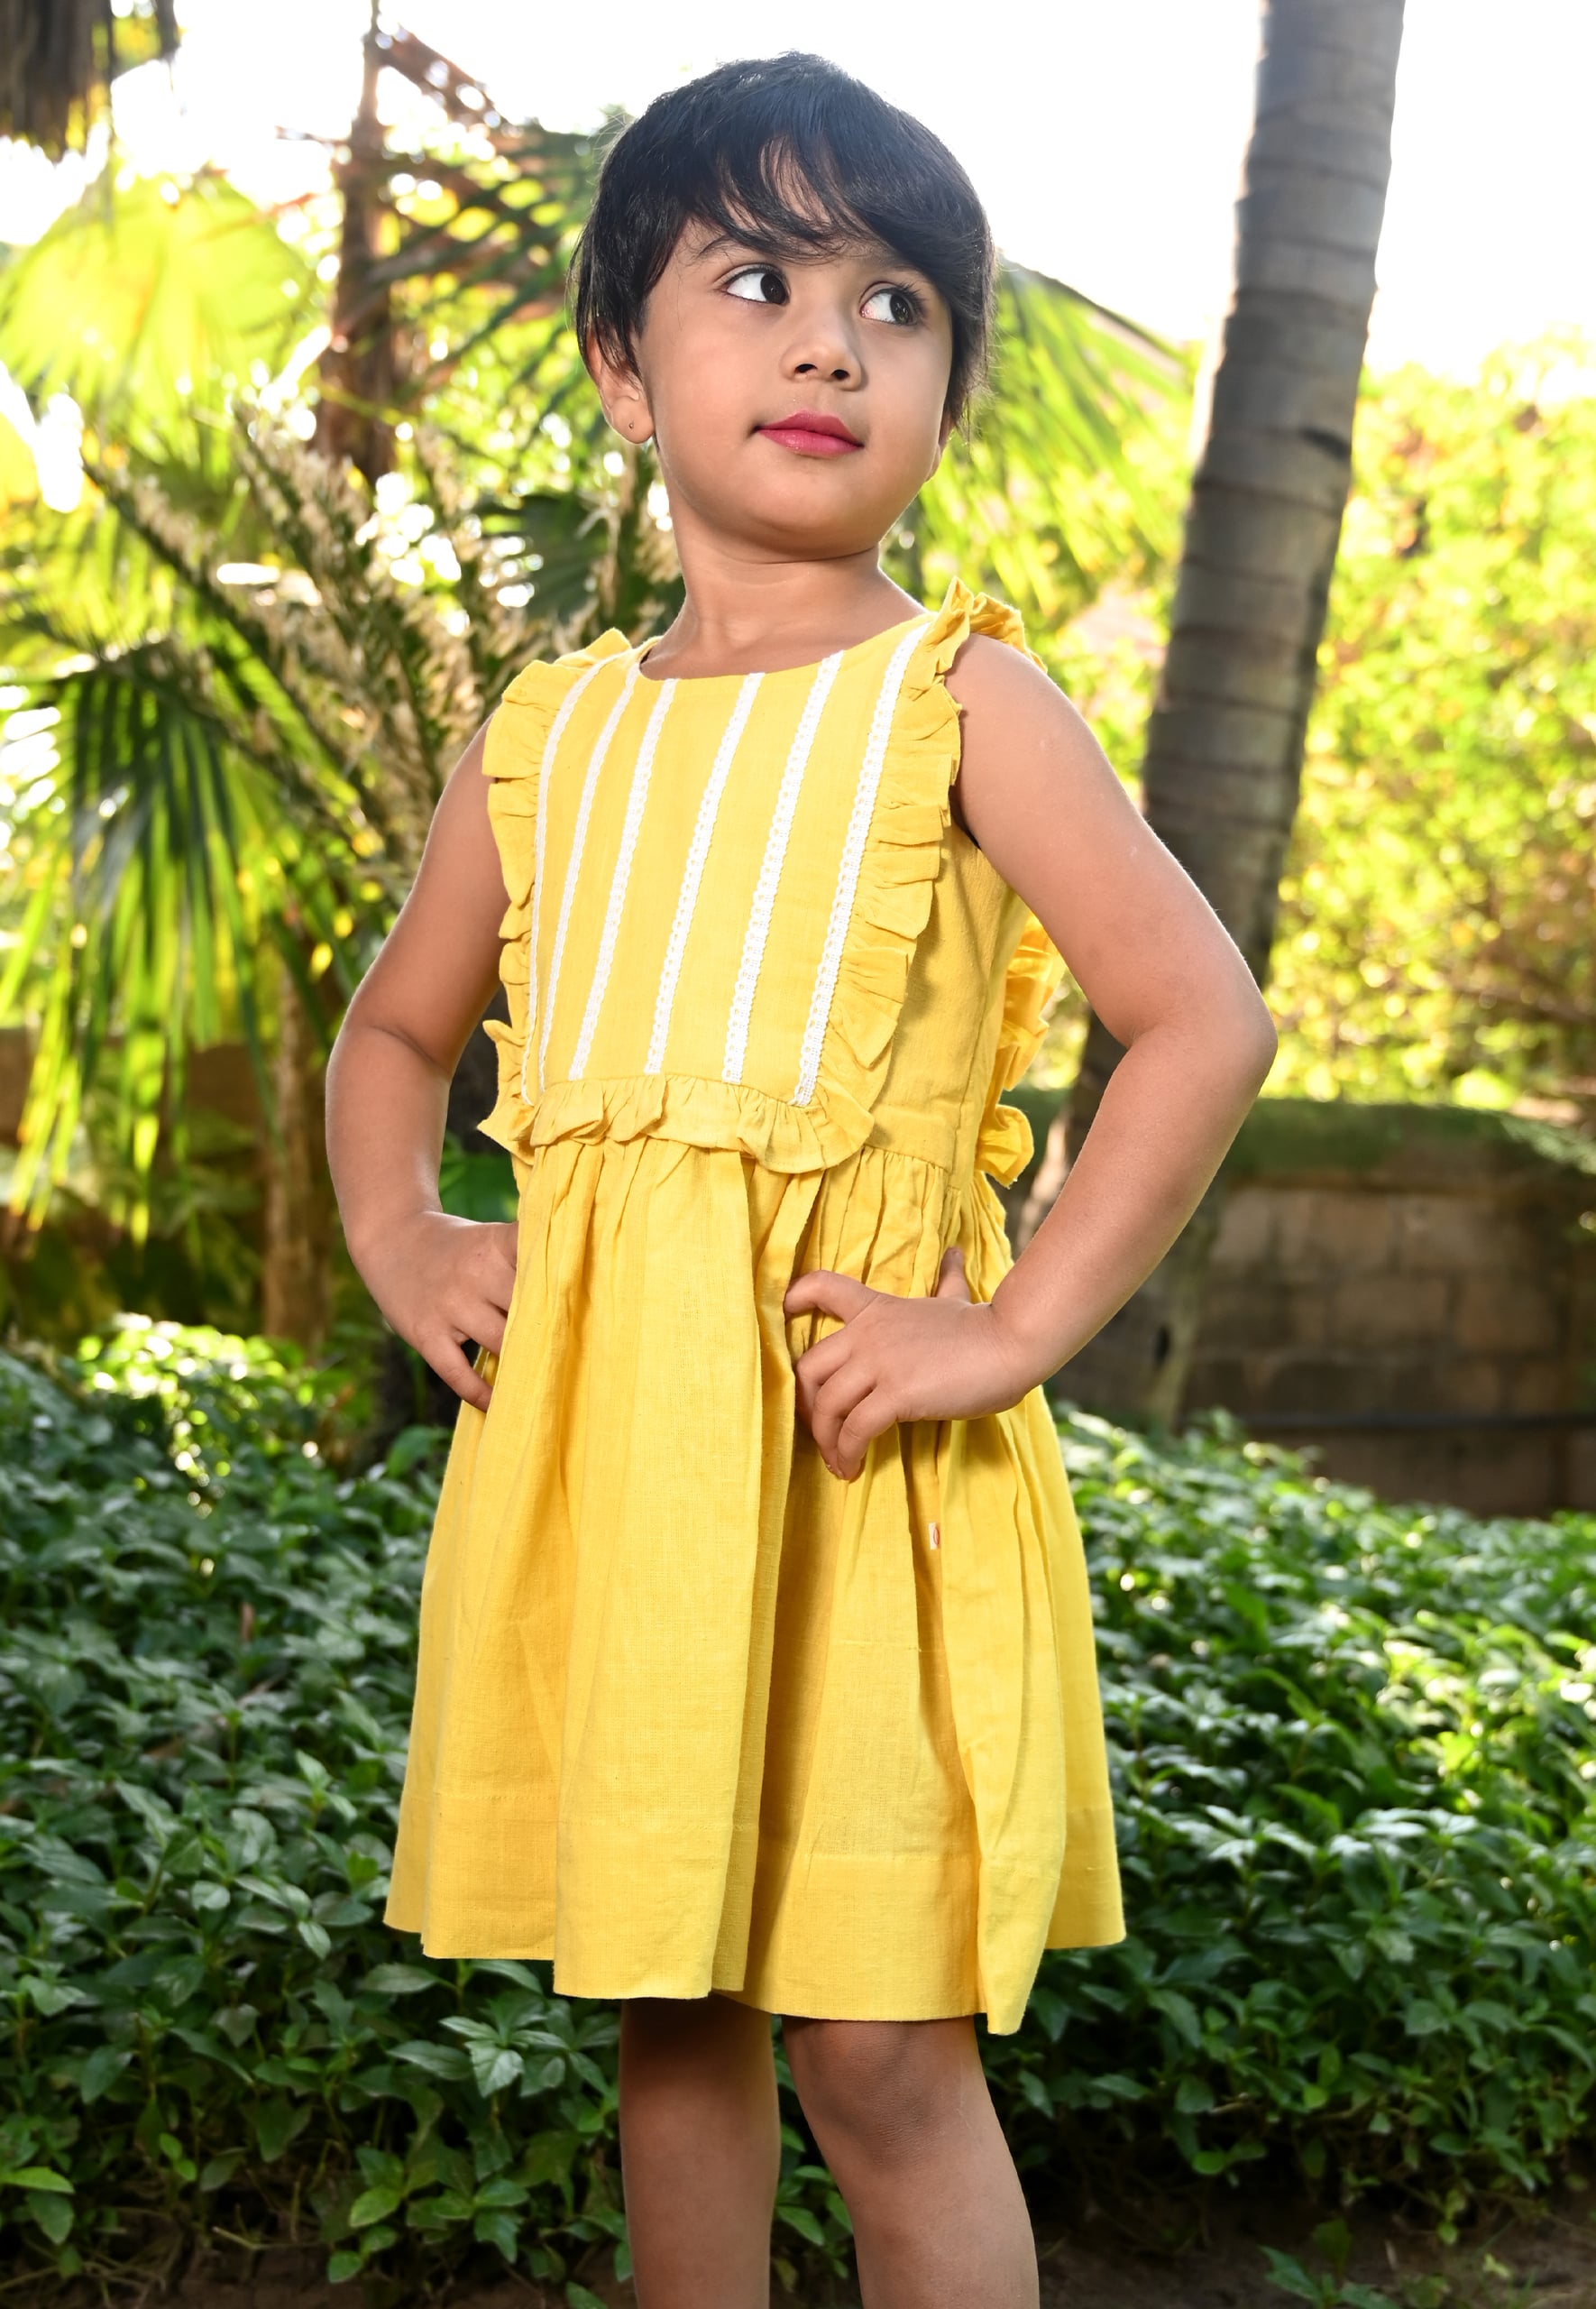 Style Tips For Little Kids - Baby Couture India